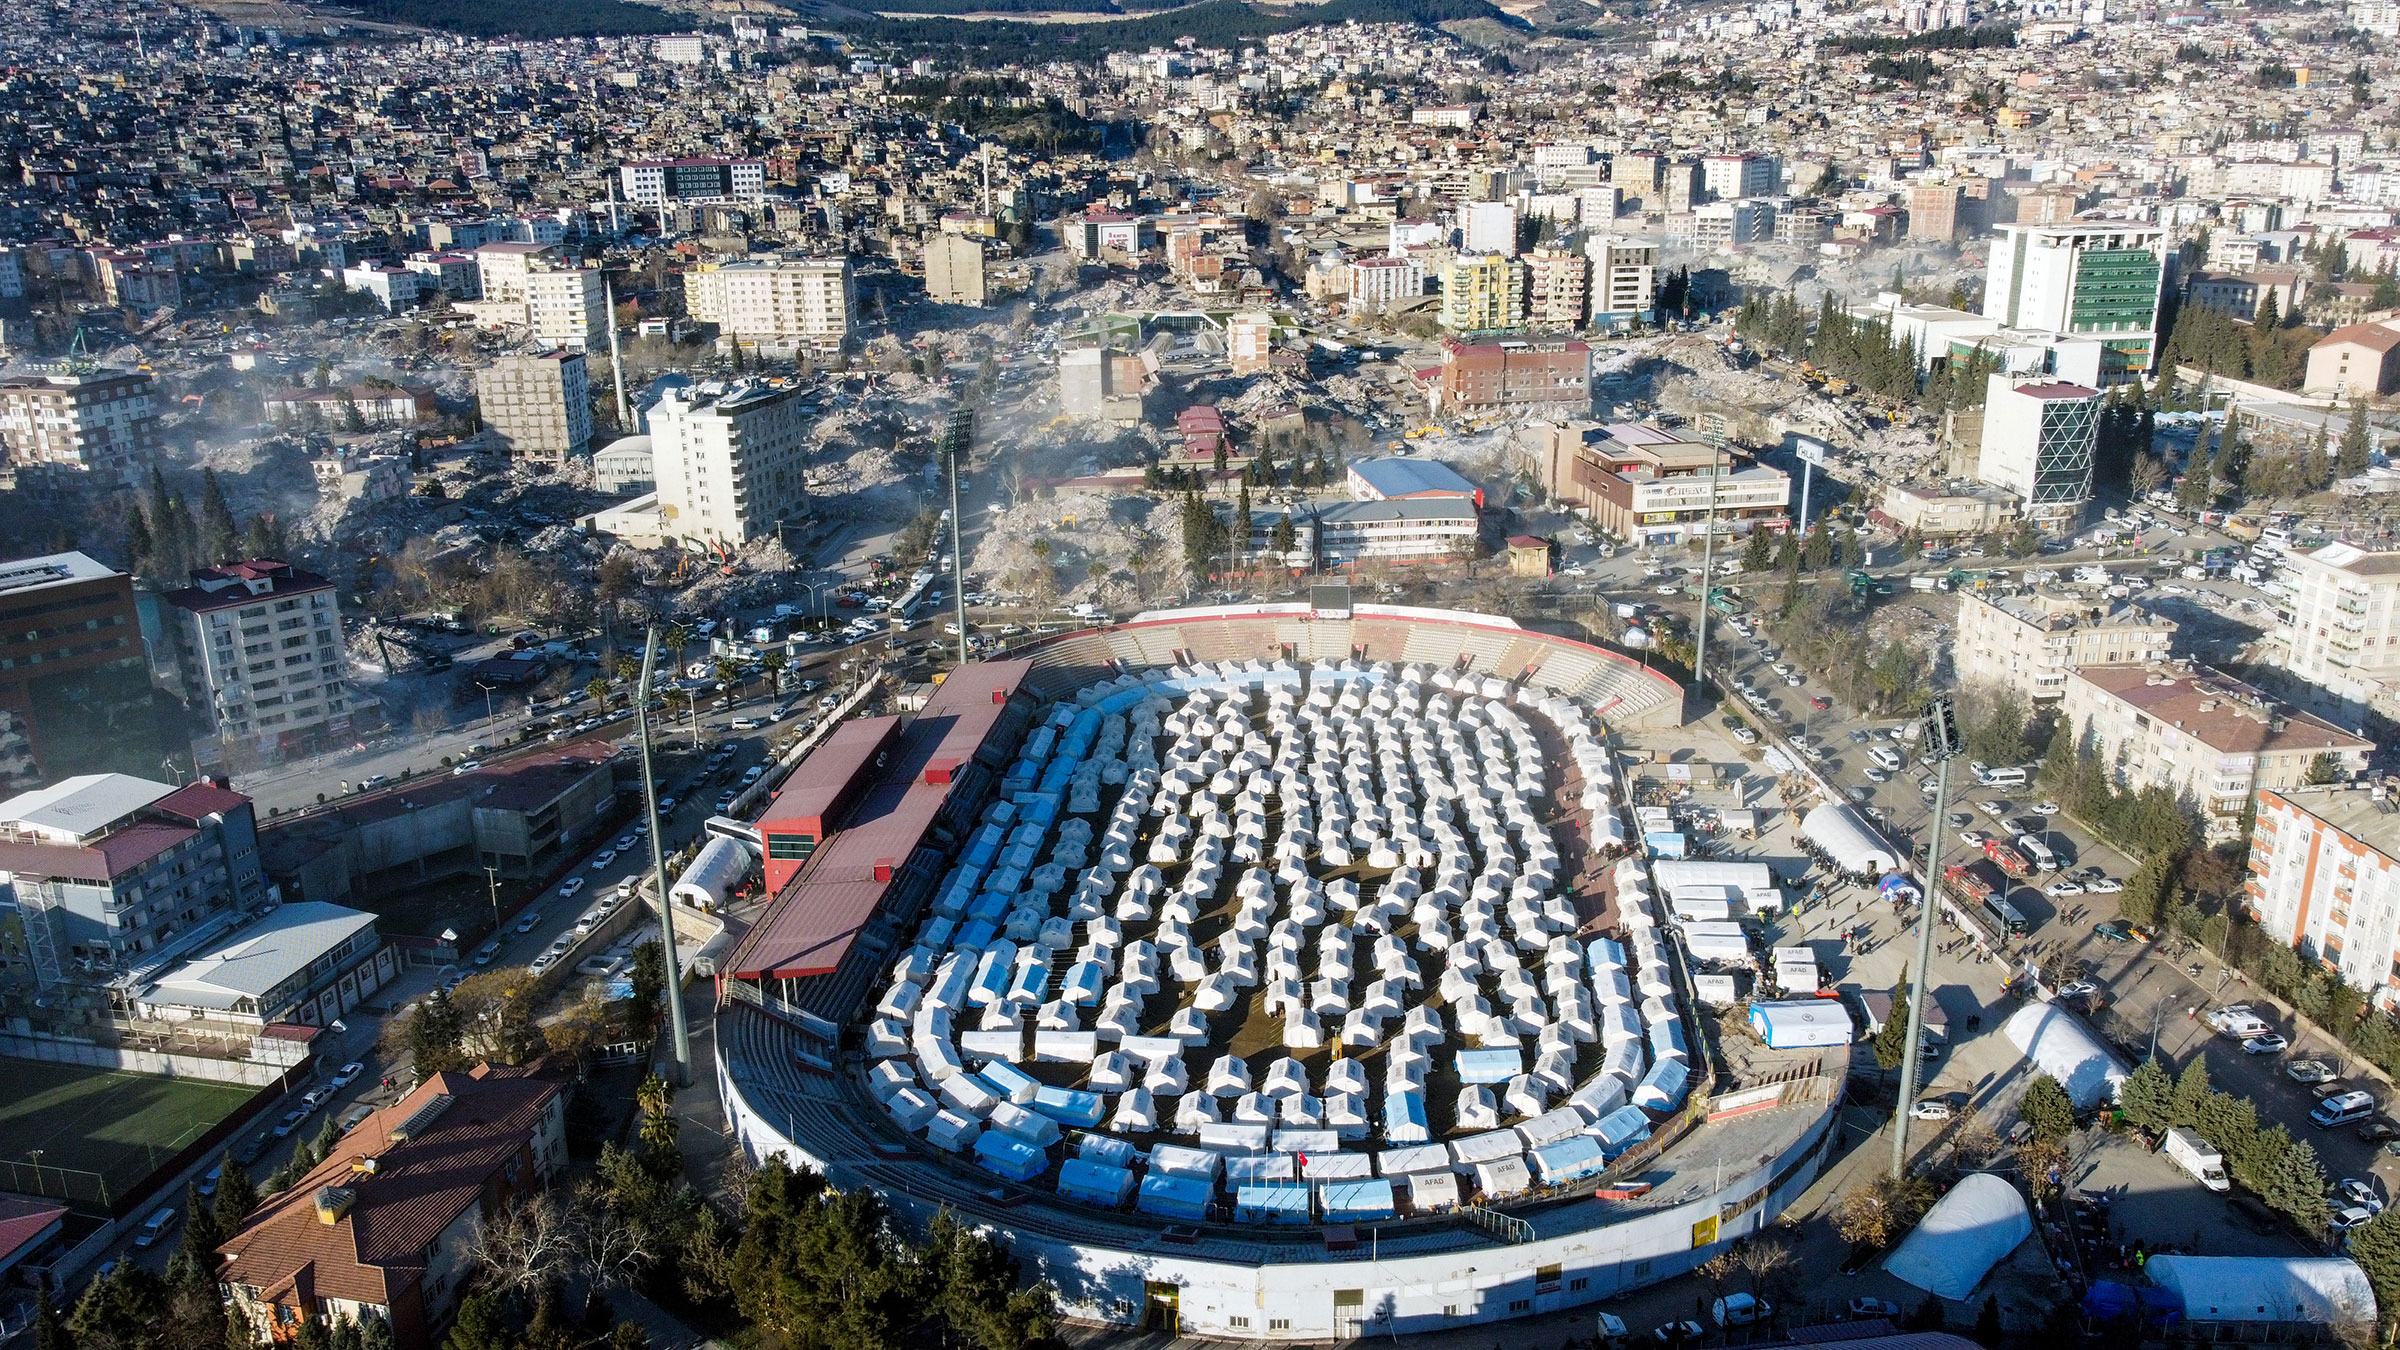 A view of 12 Subat Stadium after tents set up by the Turkish Disaster Management Agency (AFAD) for earthquake victims, in the city center of Kahramanmaras on Feb. 15, 2023. (Mehmet Kaman—Anadolu Agency/Getty Images)